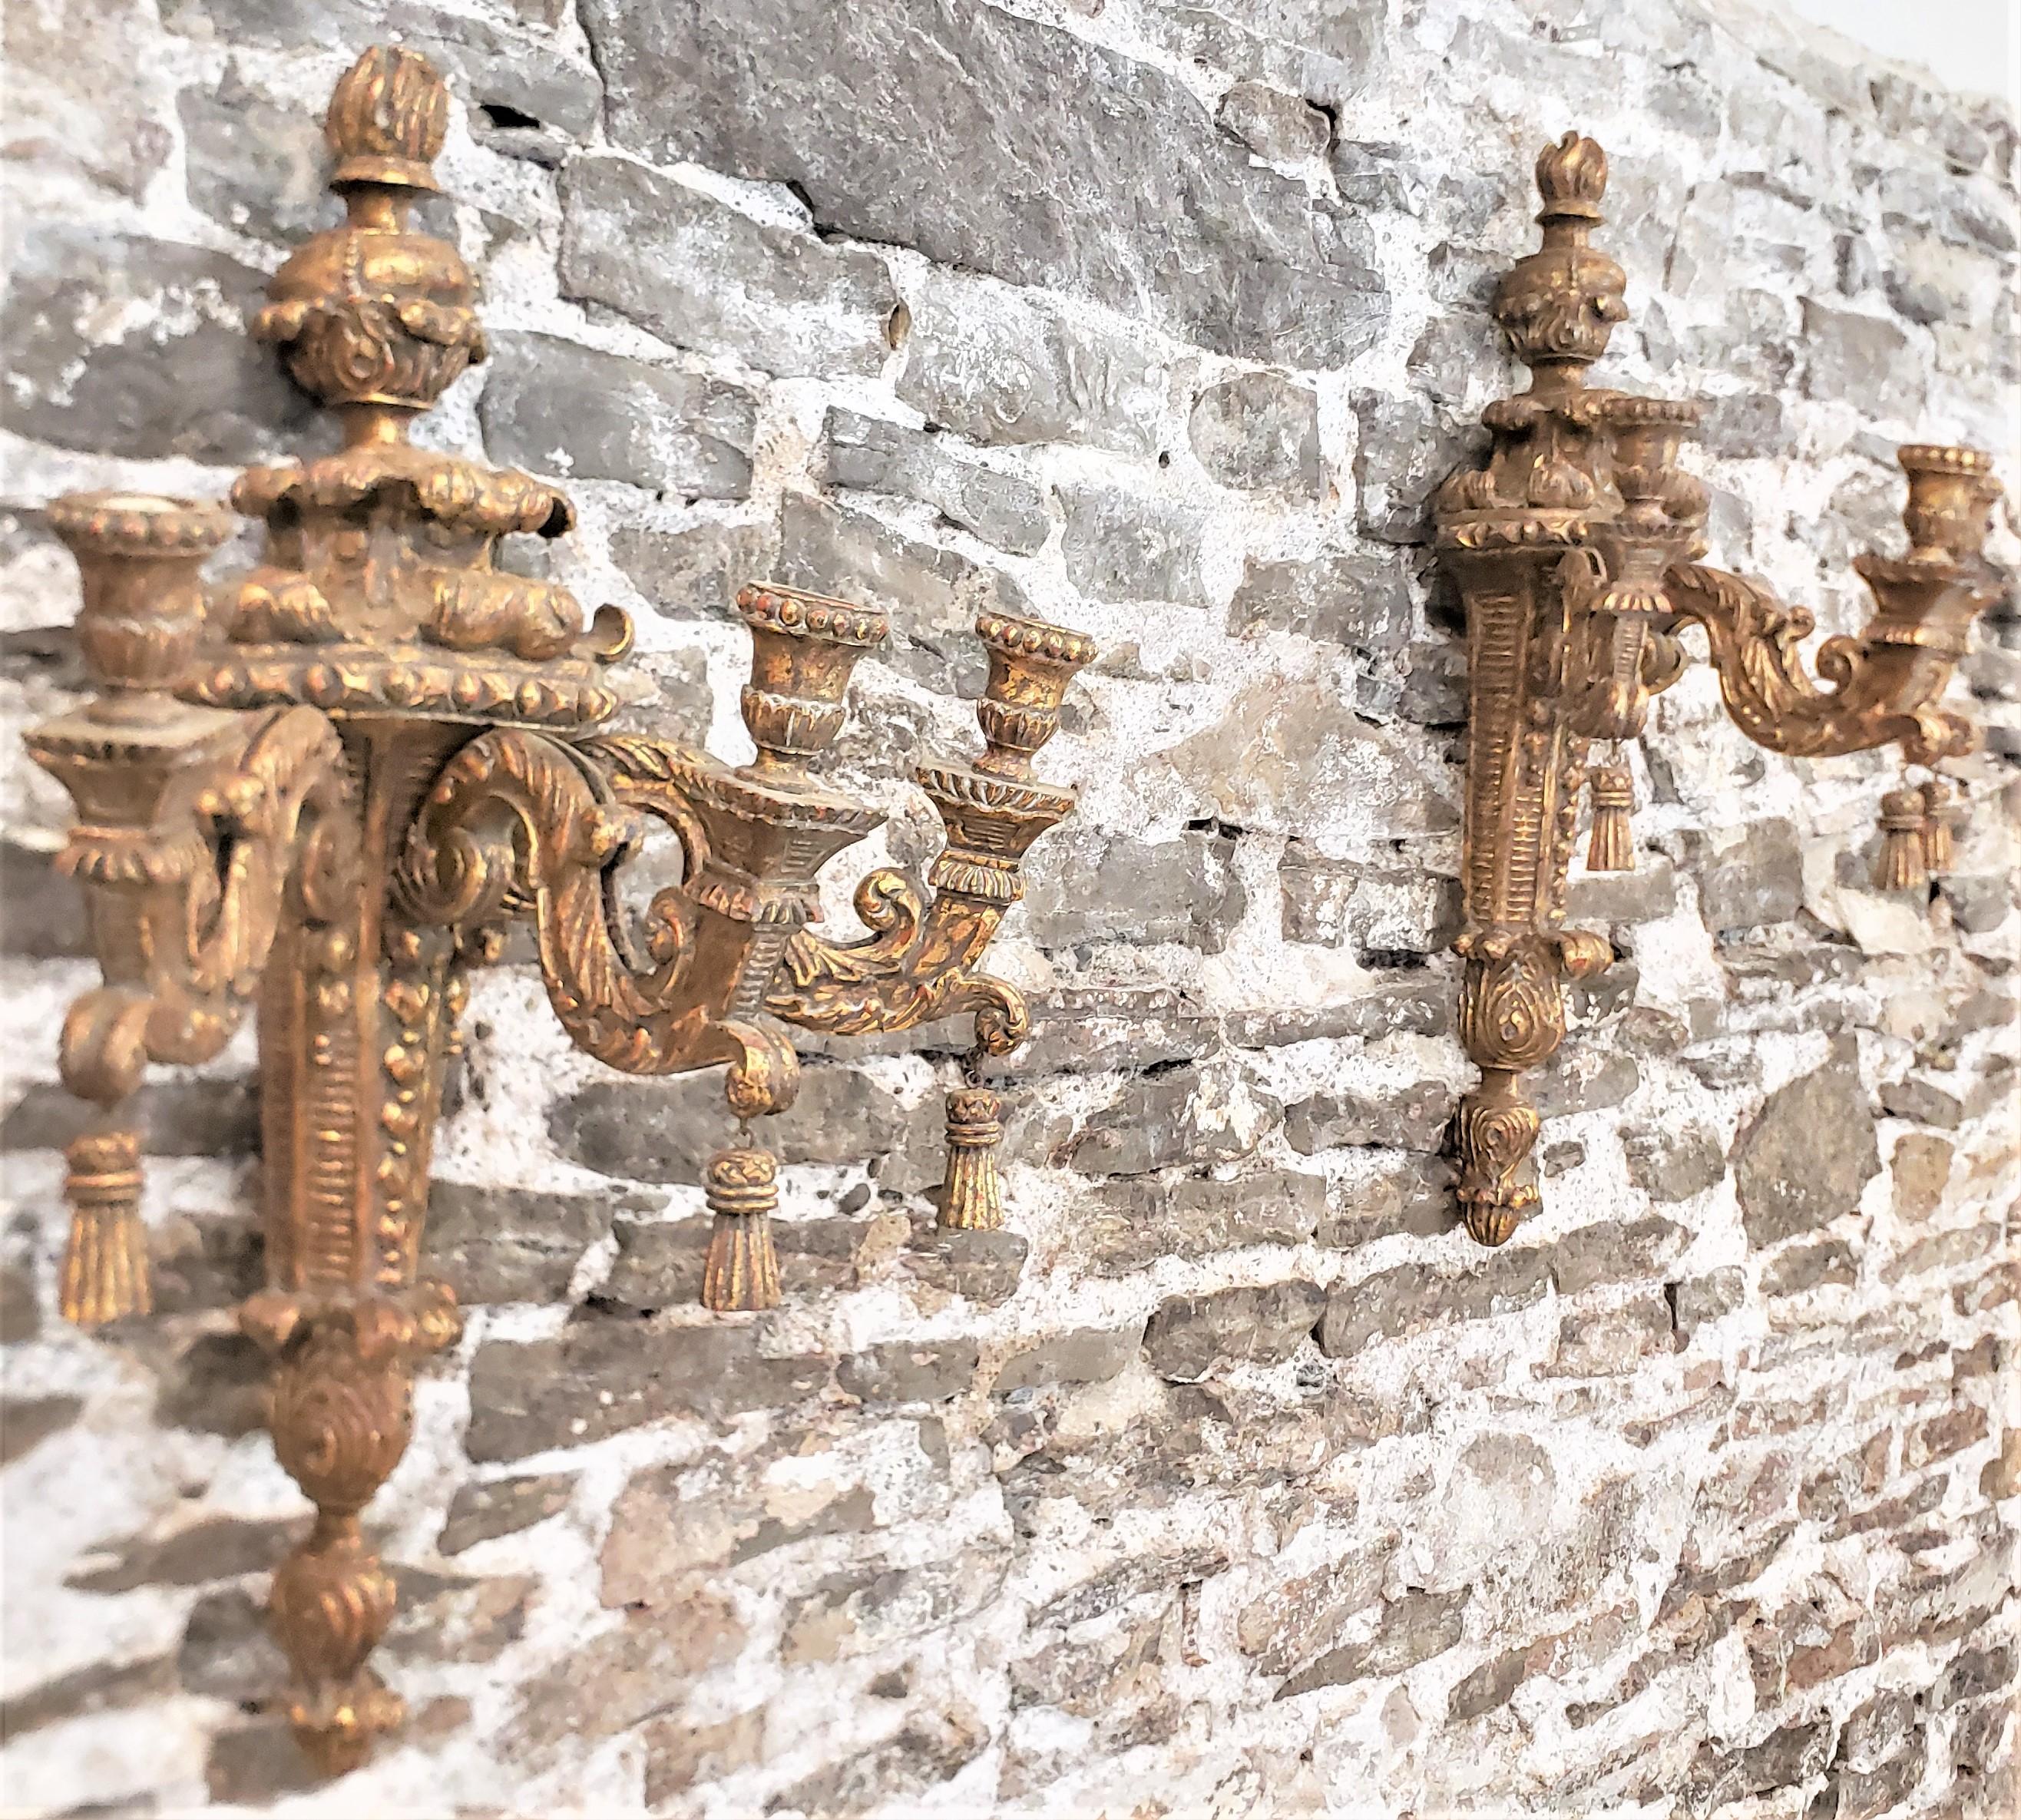 Italian Pair of Large Carved & Gilt Finished Wooden Candle Wall Sconces or Holders